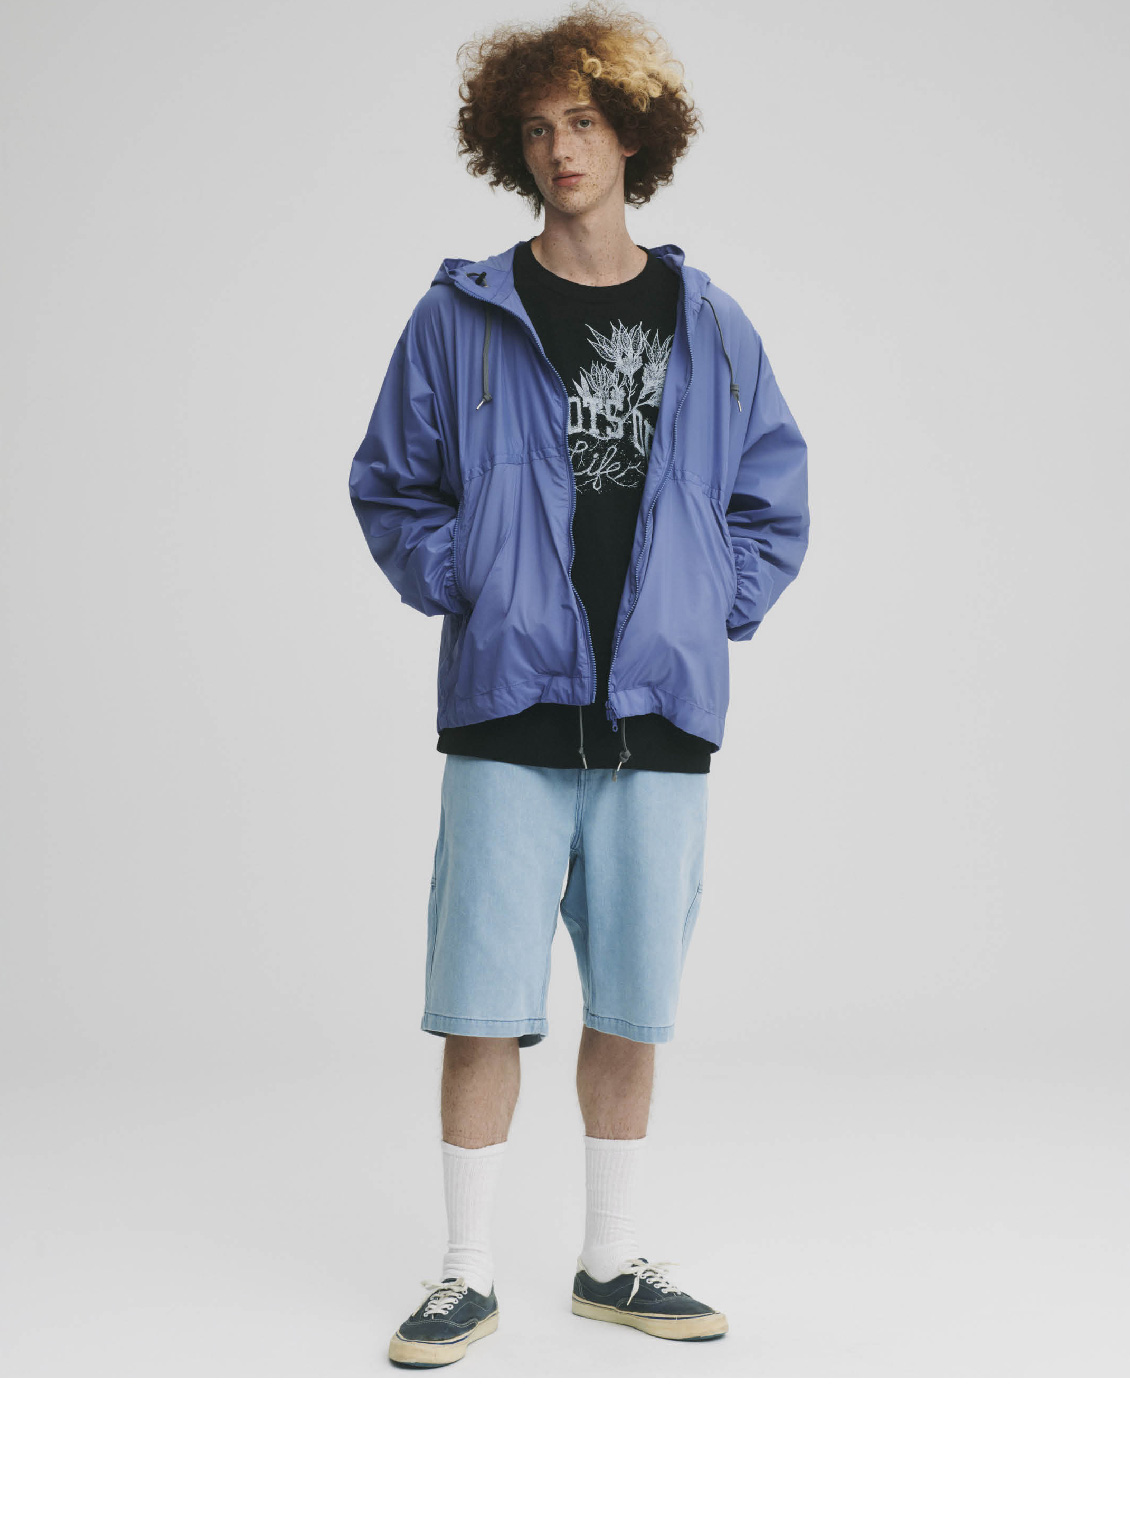 the north face purple label reversible field cardigan